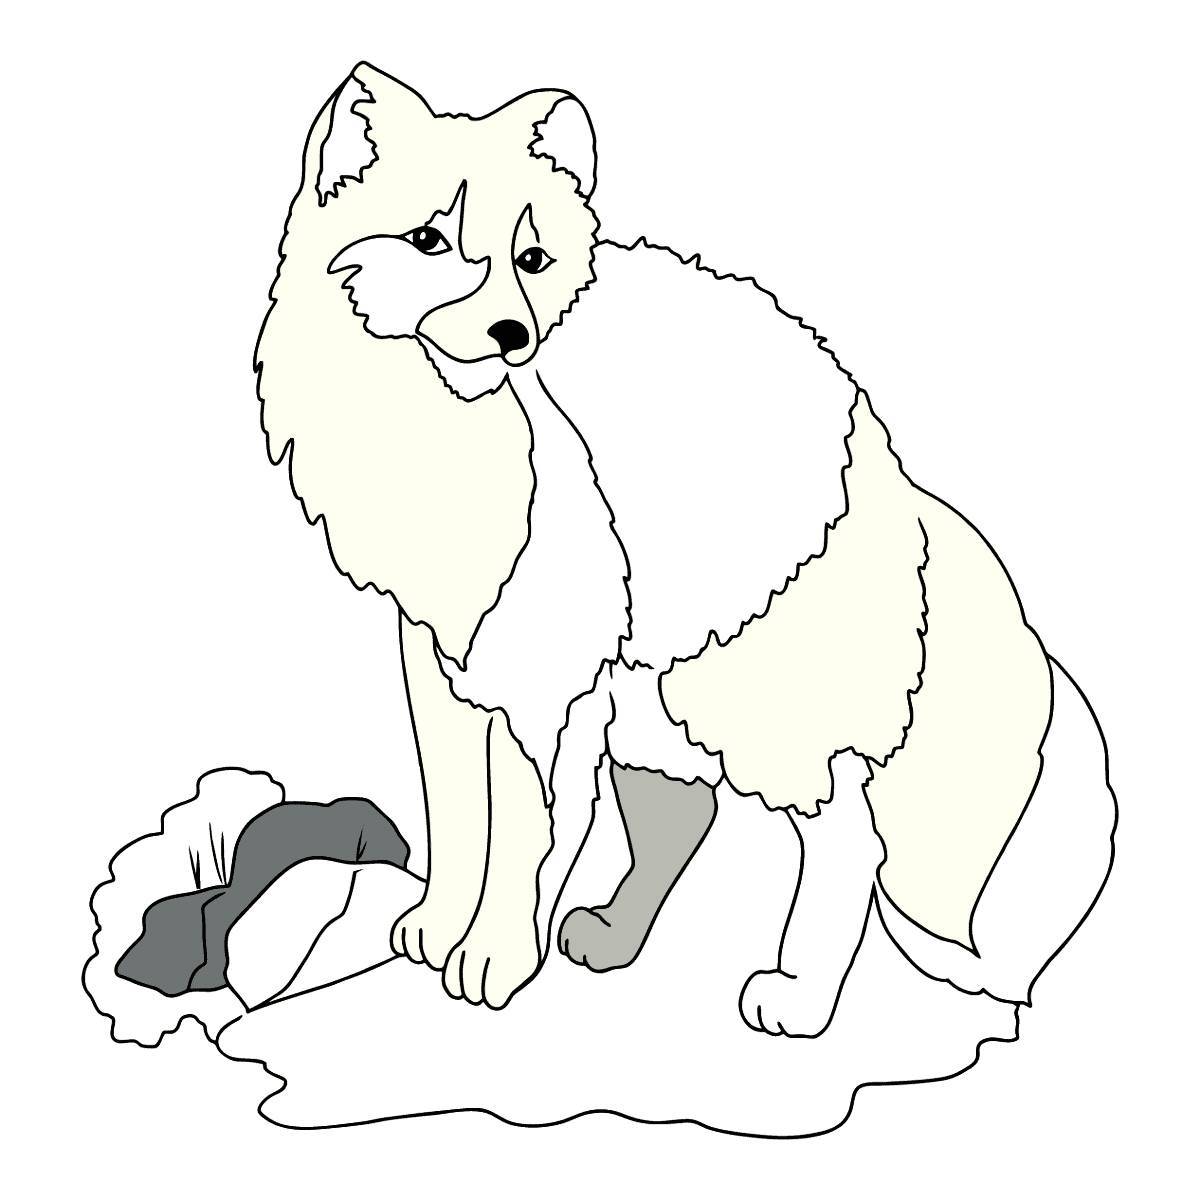 Colorful fox coloring page